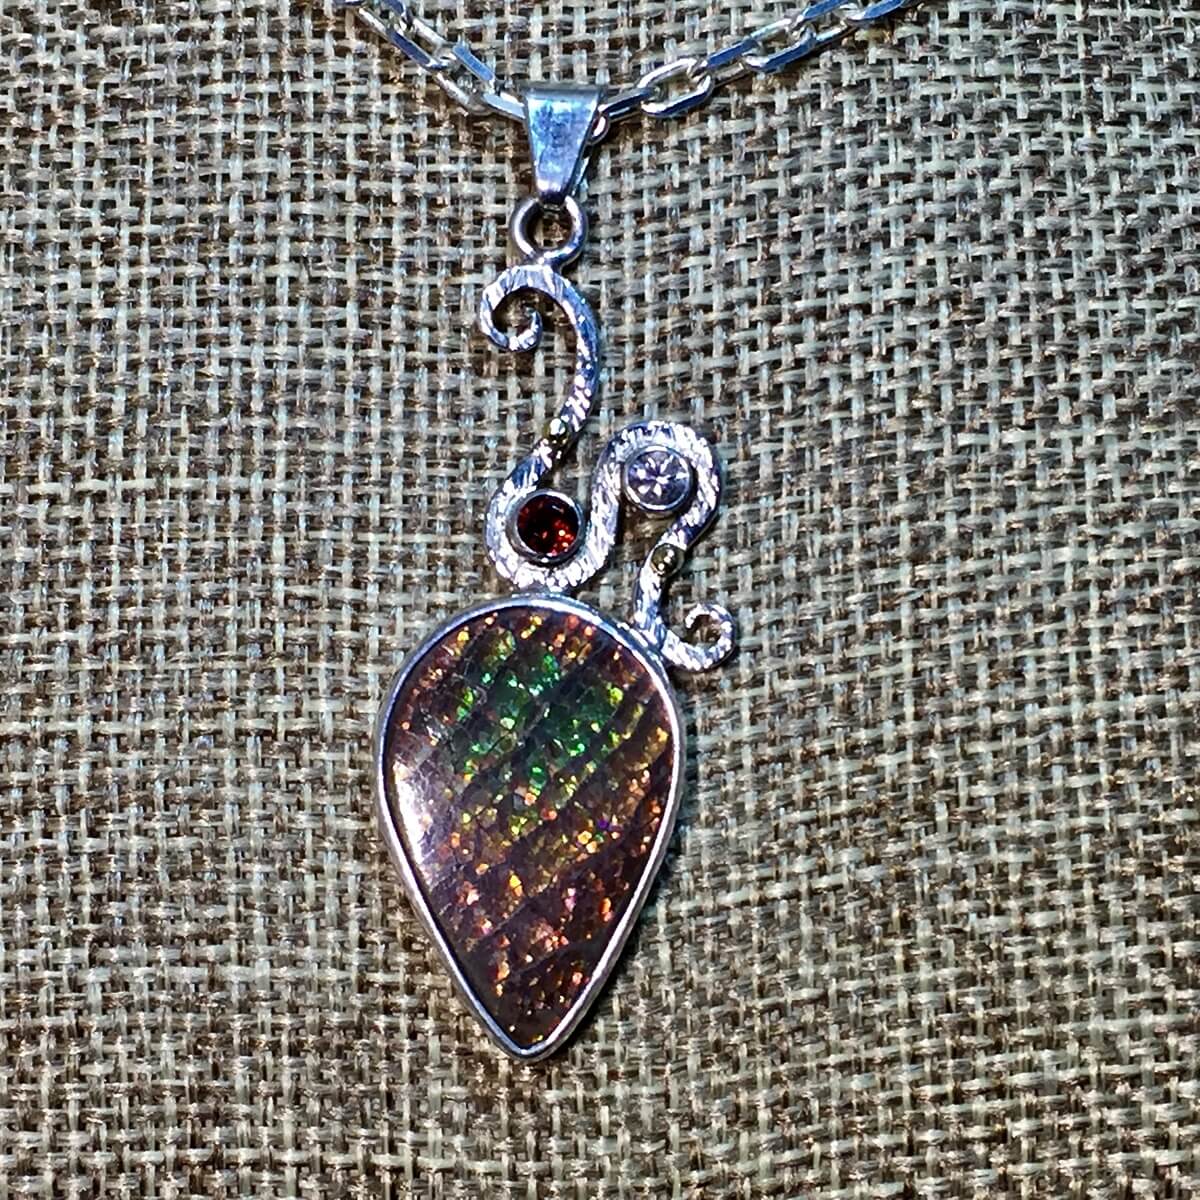 Canadian Ammolite (ammonite) Pendant, with Idaho garnet, White Sapphire, set in Sterling/Fine Silver/18K Gold.
https://dancing-raven-stoneworks-llc.square.site/product/drs-19-206-19-collection-fossil-ammonite-pendant/90?cs=true